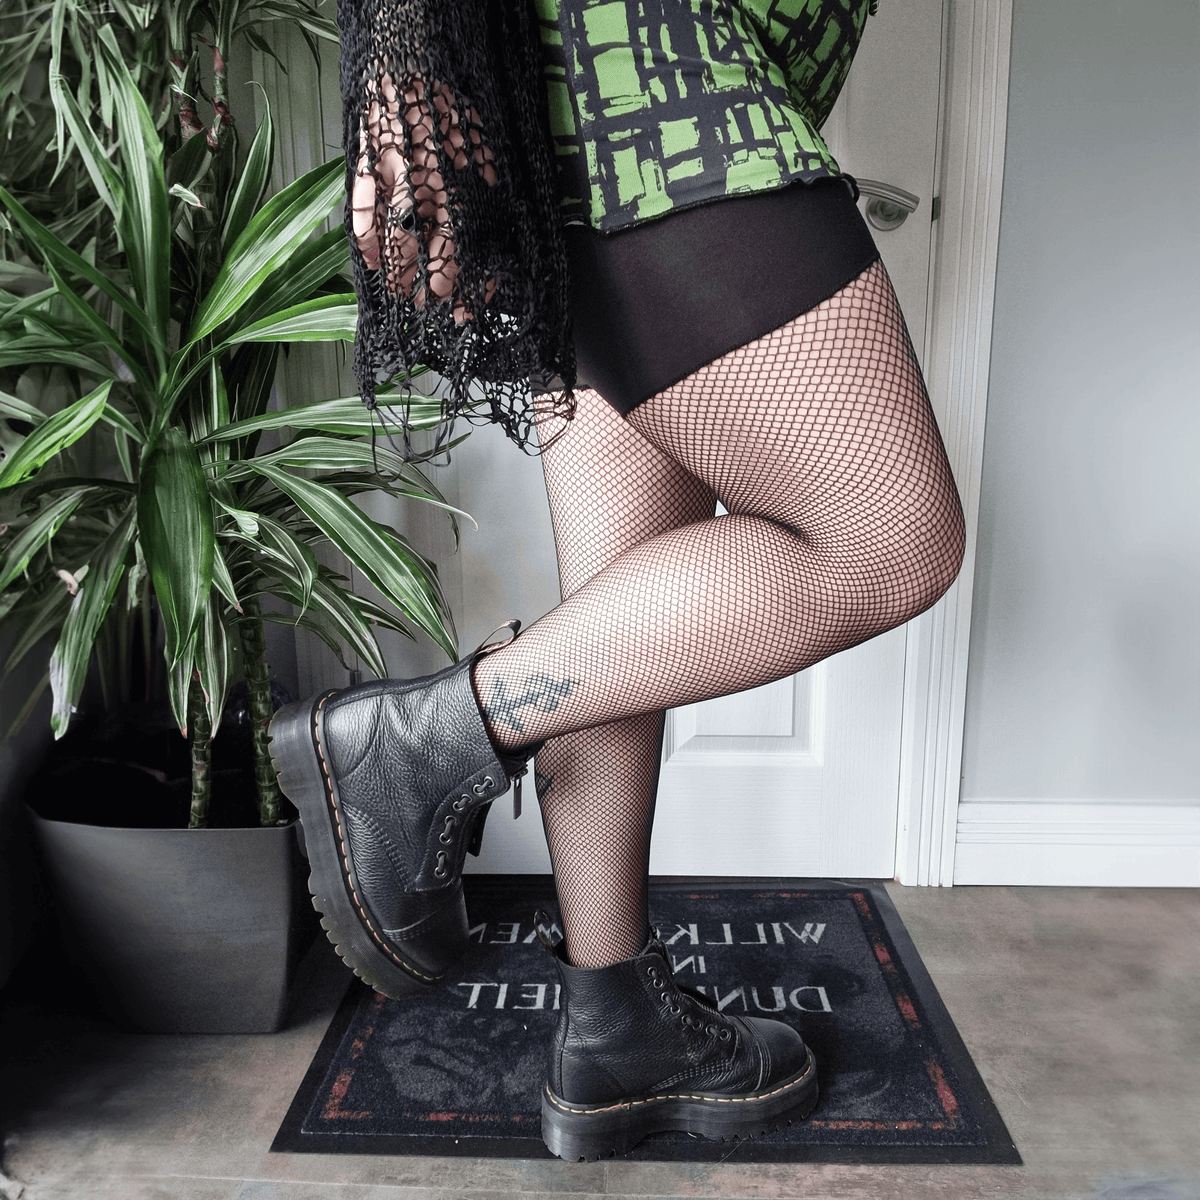 Thighs The Limit Fishnets - Snag